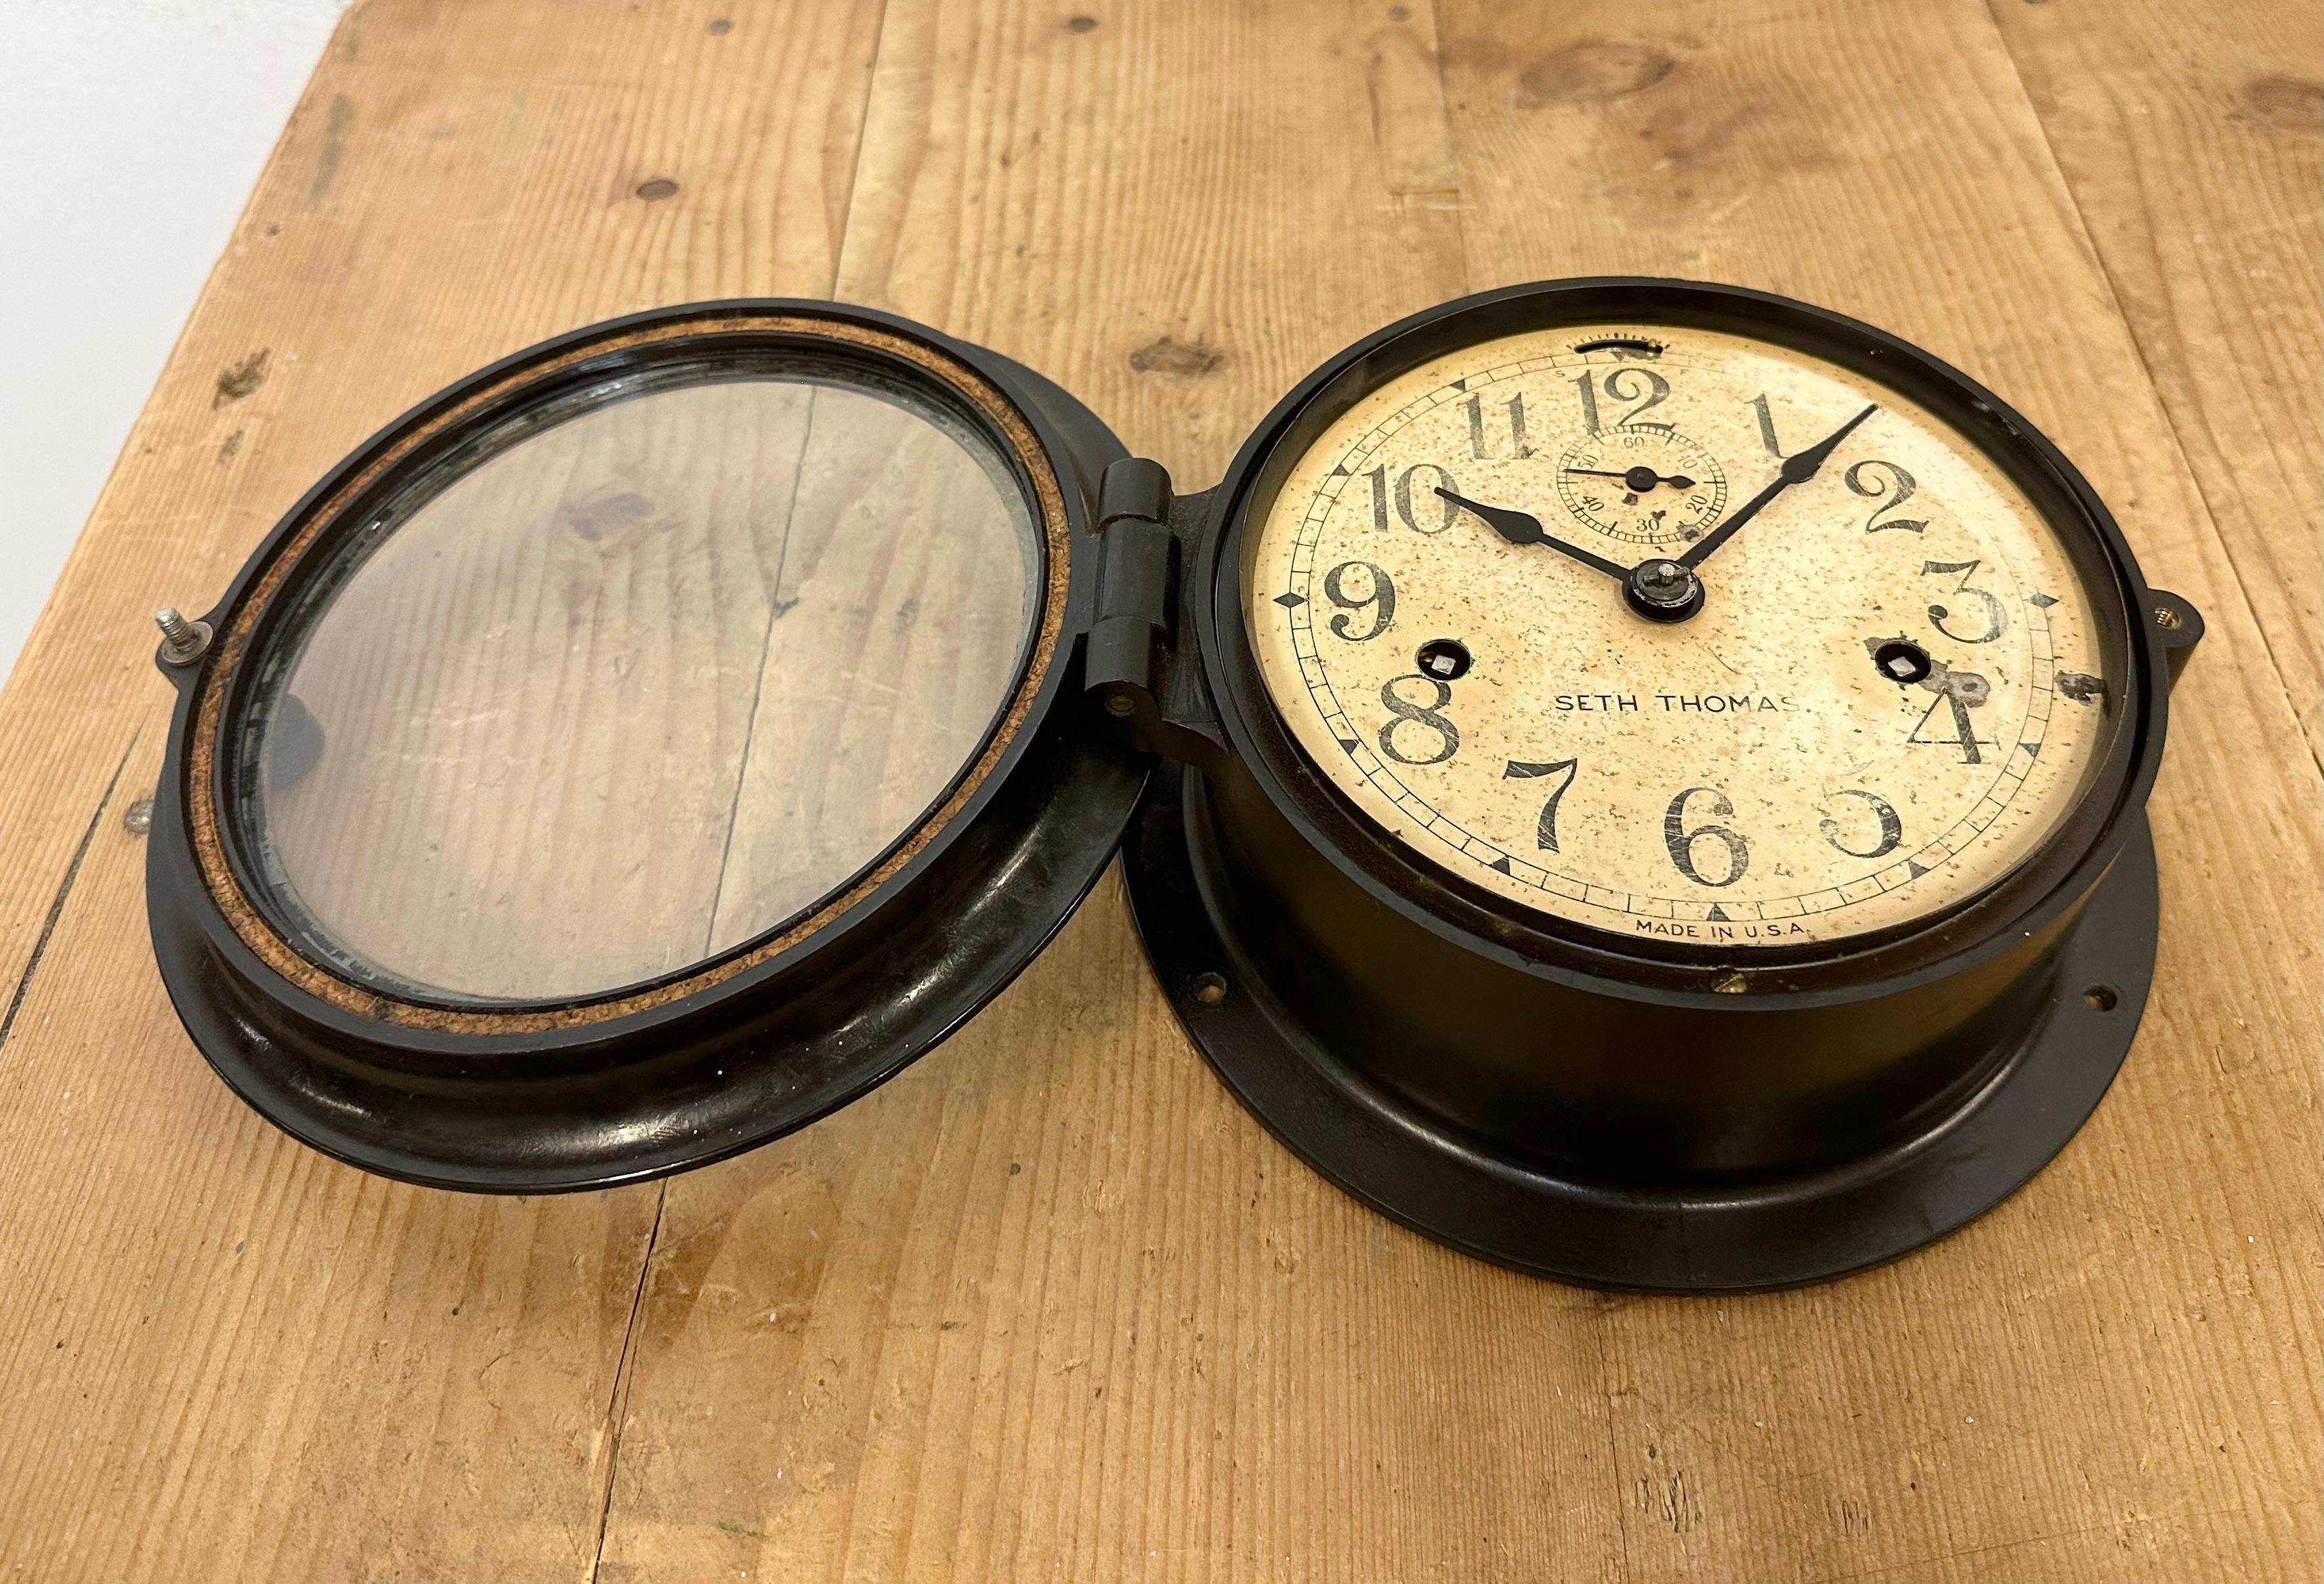  Vintage Mechanical Bakelite Maritime Wall Clock from Seth Thomas, 1950s For Sale 6